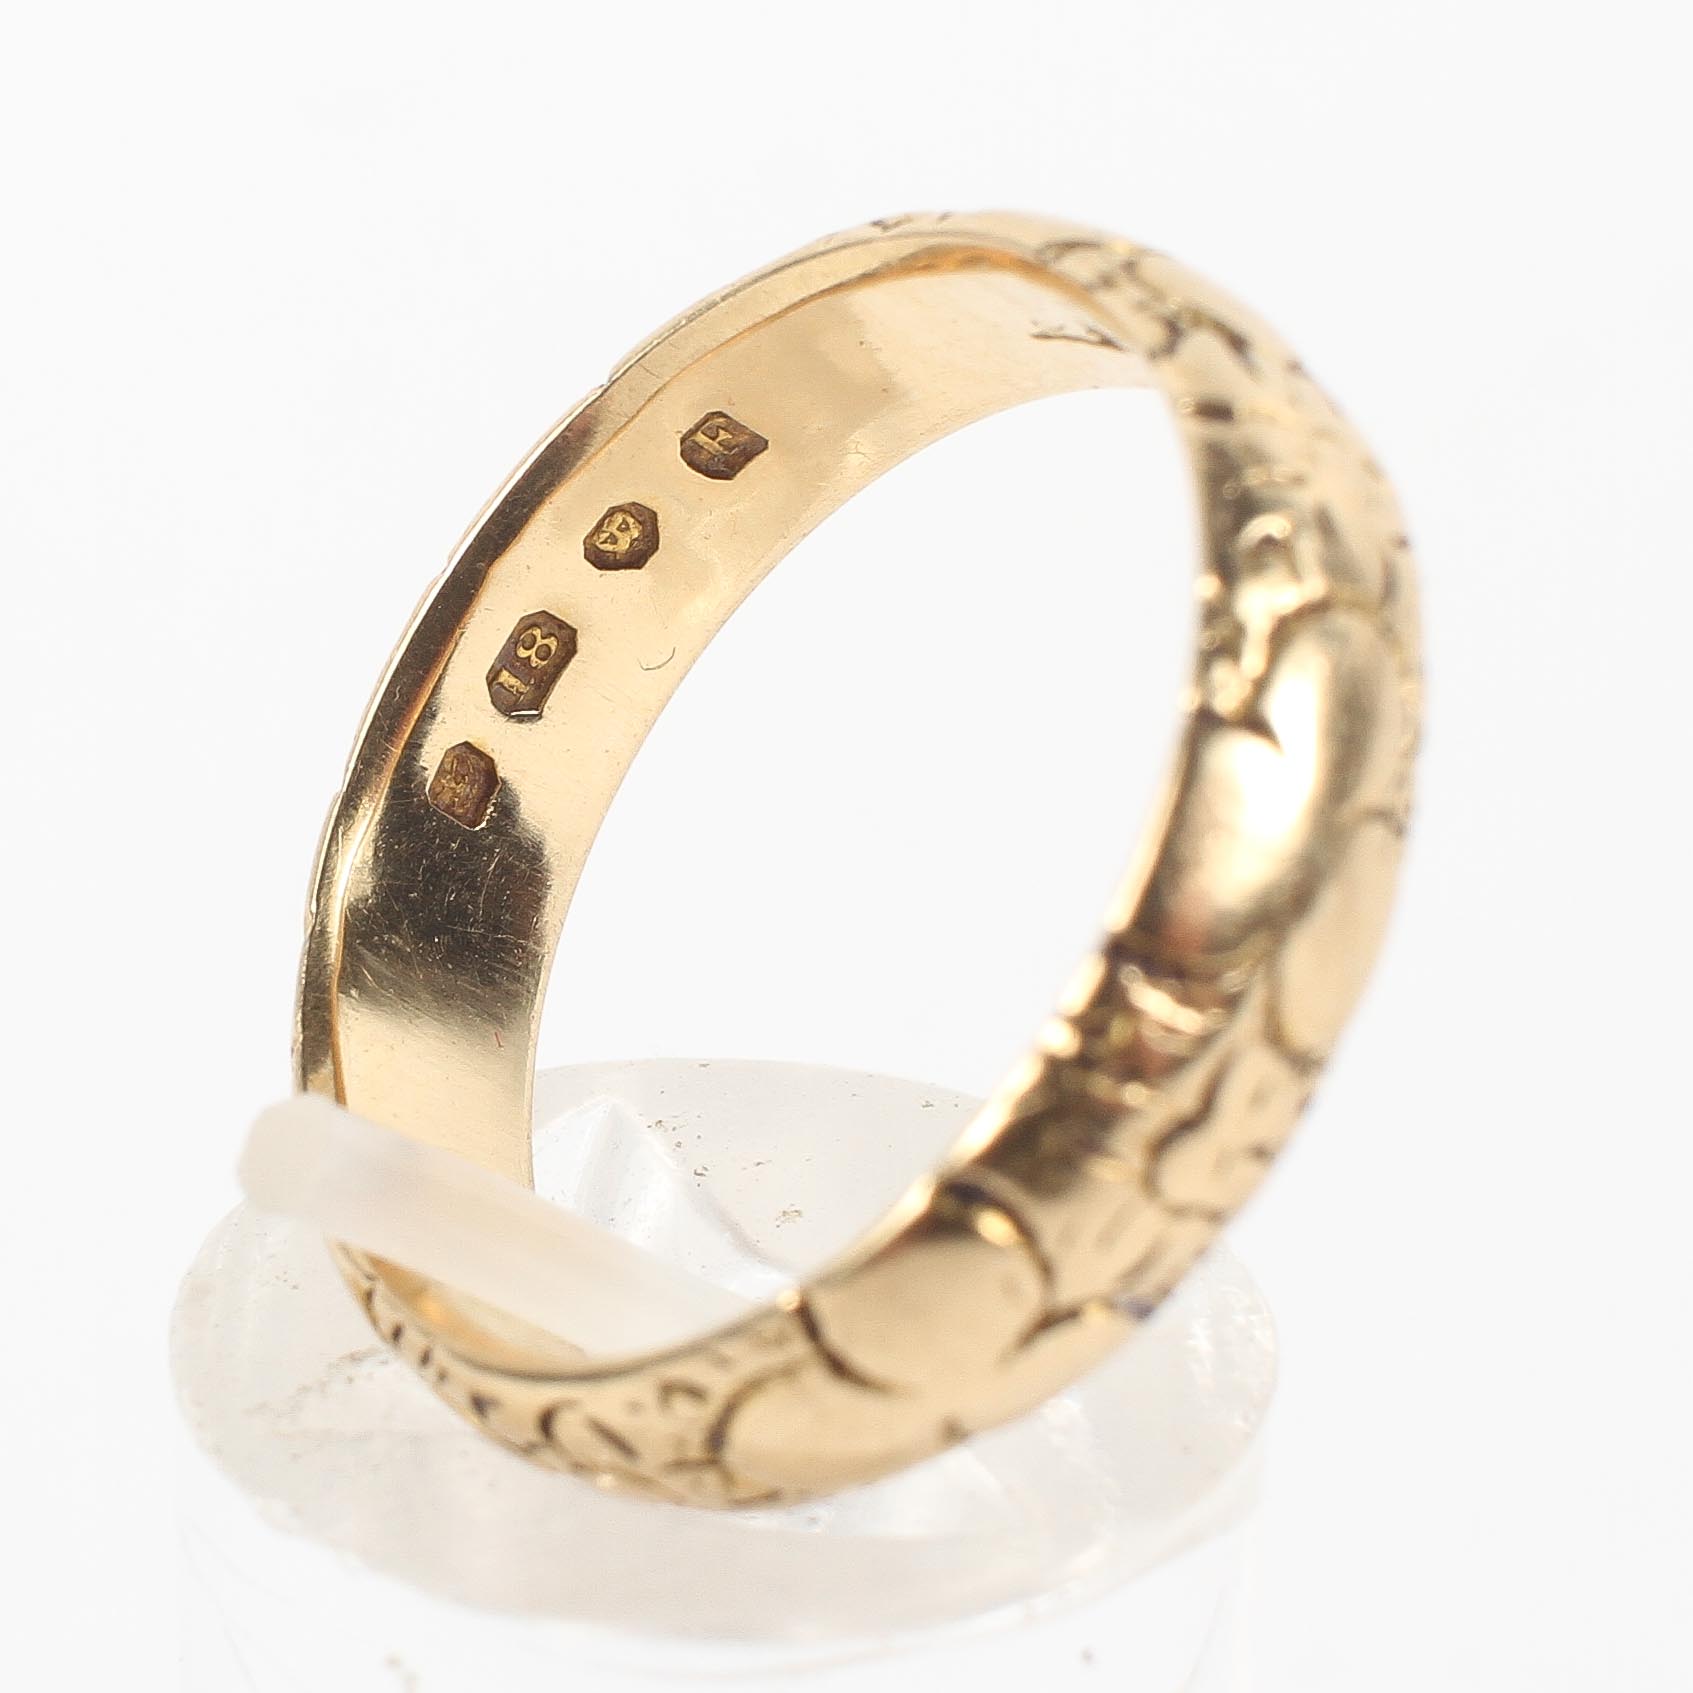 A yellow metal D shape 5mm wedding ring with cherry blossom design (worn) Hallmarked 18ct gold, - Image 4 of 4